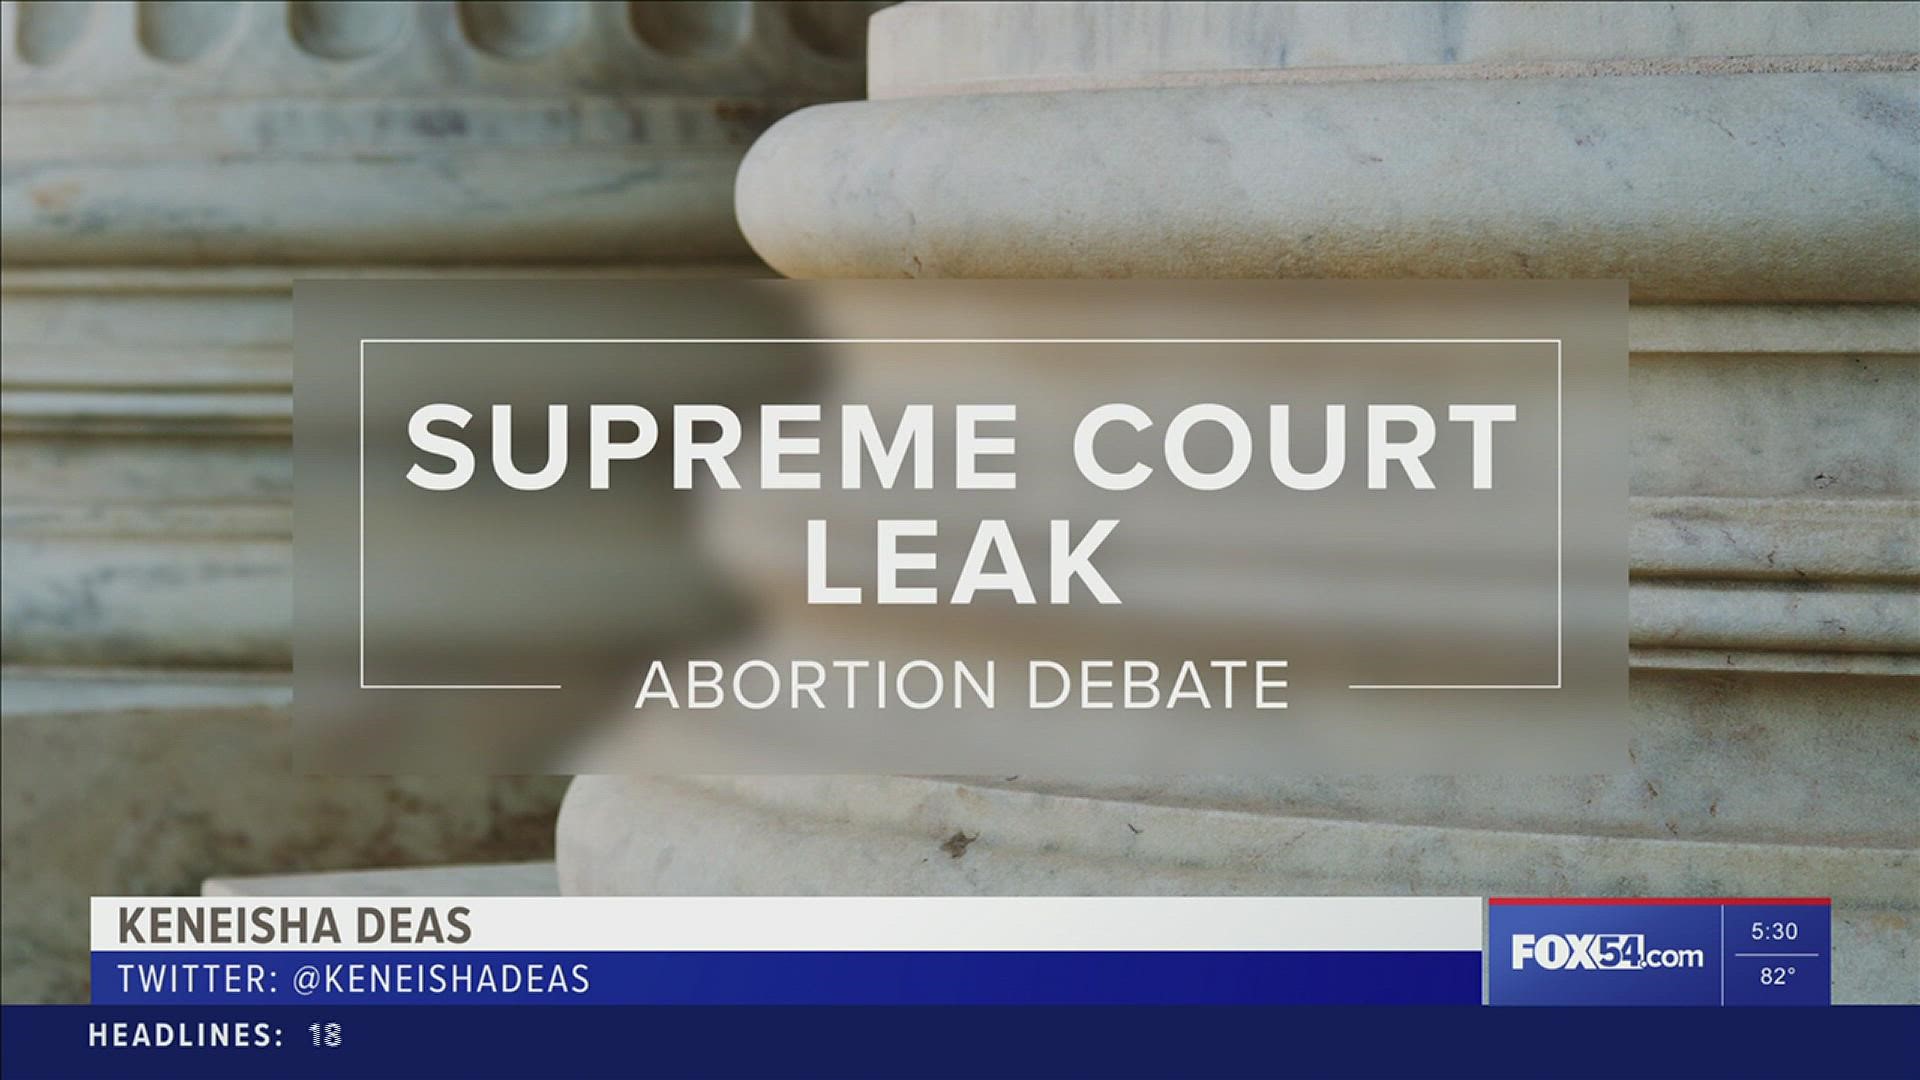 All eyes are on the U.S. Supreme Court... After a draft decision to overturn the Roe V. Wade landmark case on abortion rights was leaked.